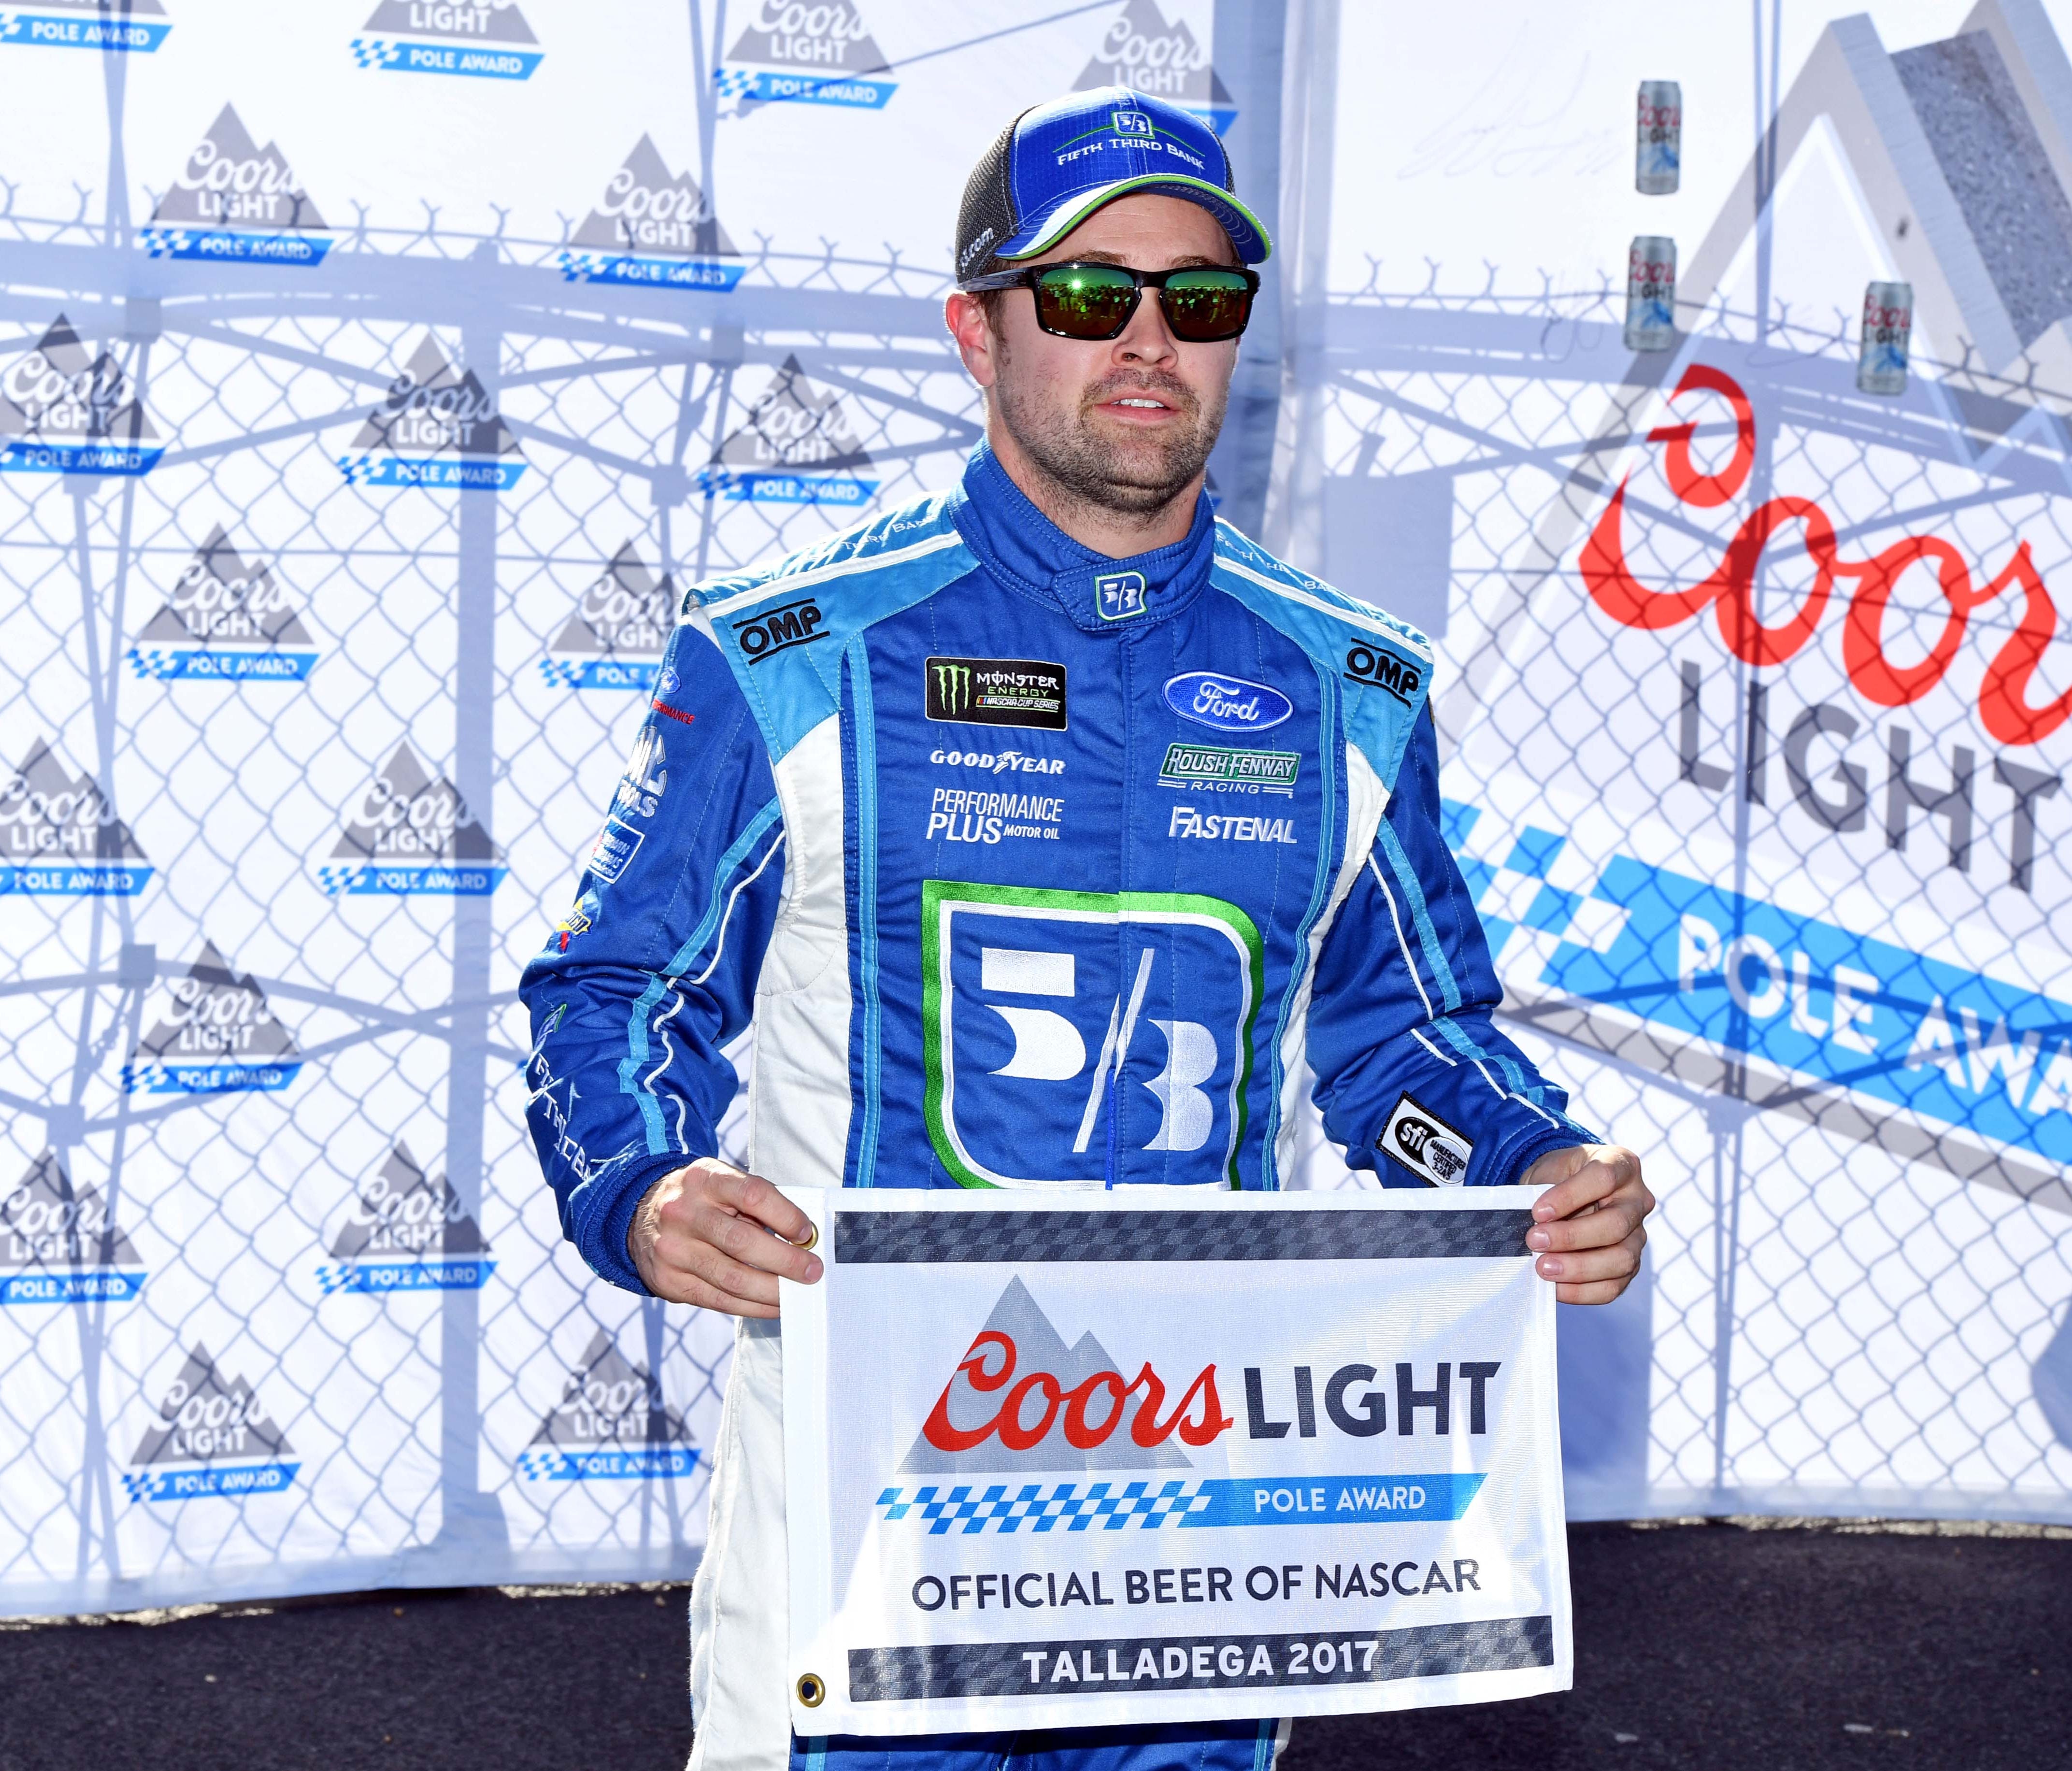 Ricky Stenhouse Jr. celebrates after winning the pole for the GEICO 500 at Talladega Superspeedway.